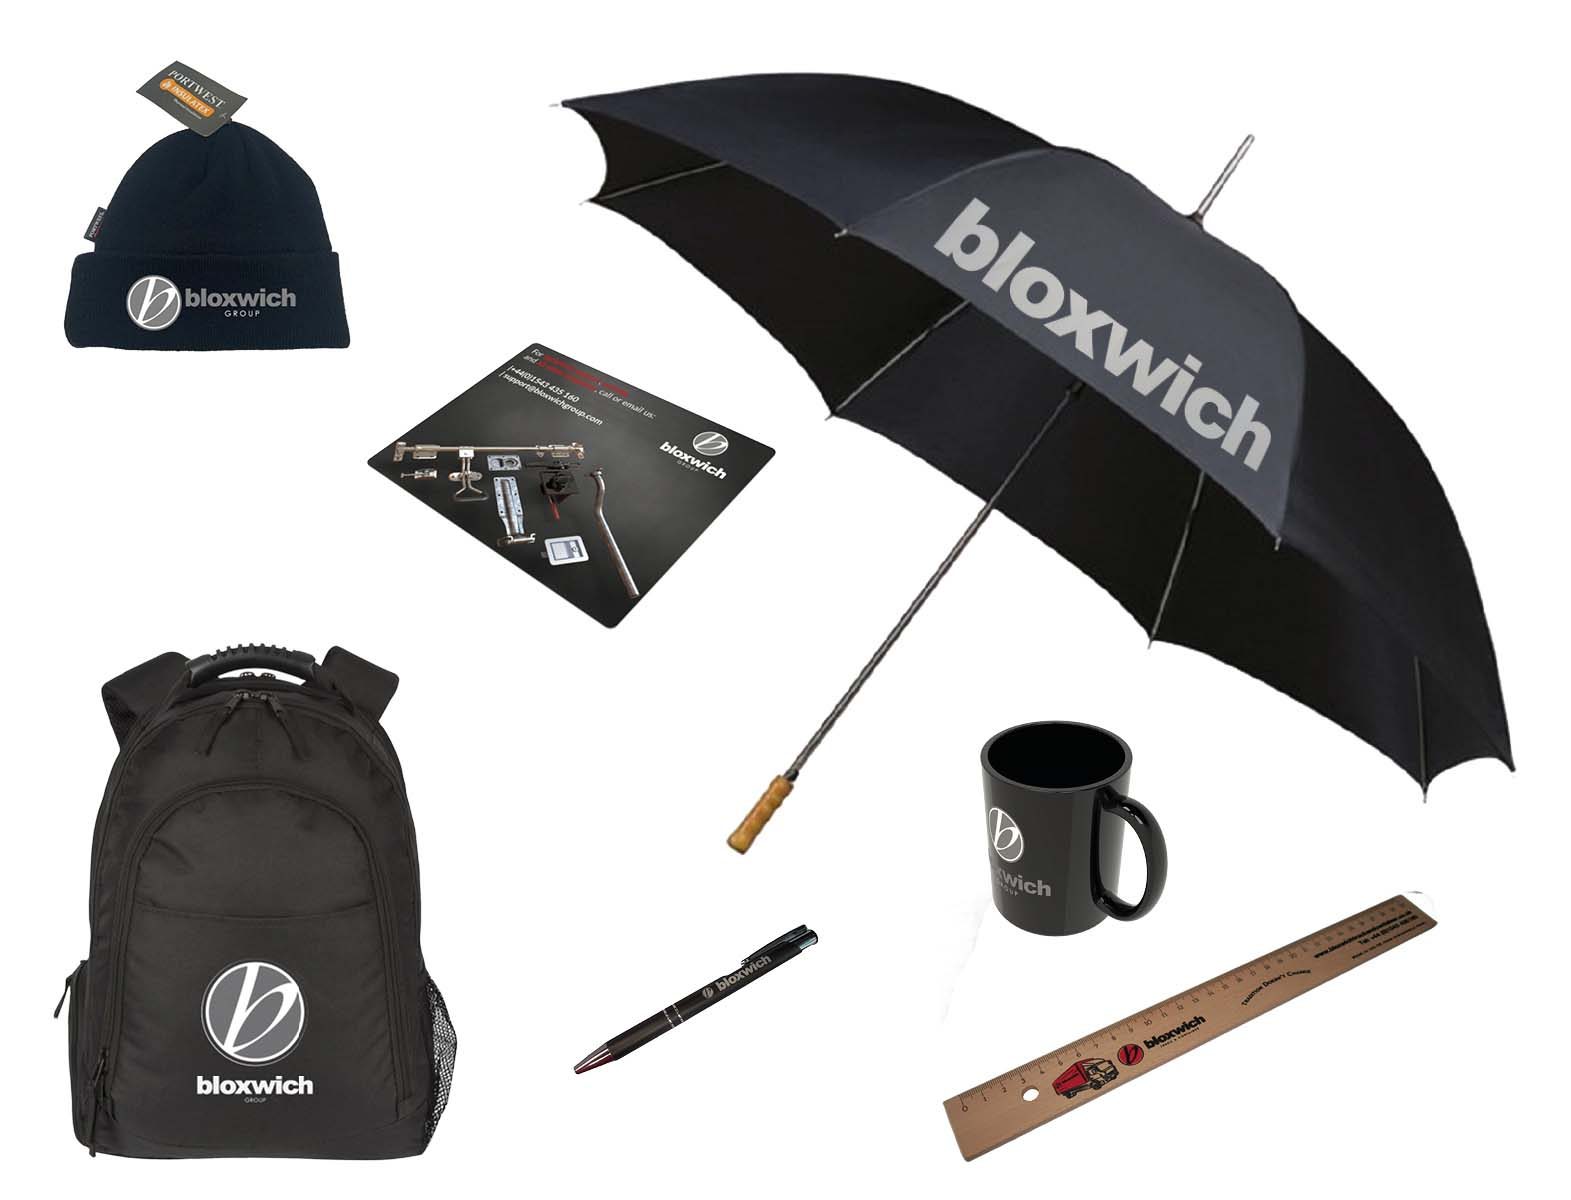 Bloxwich promotional items, can include a hat, rucksack, pen, ruler, umbrella, mousemat and mug